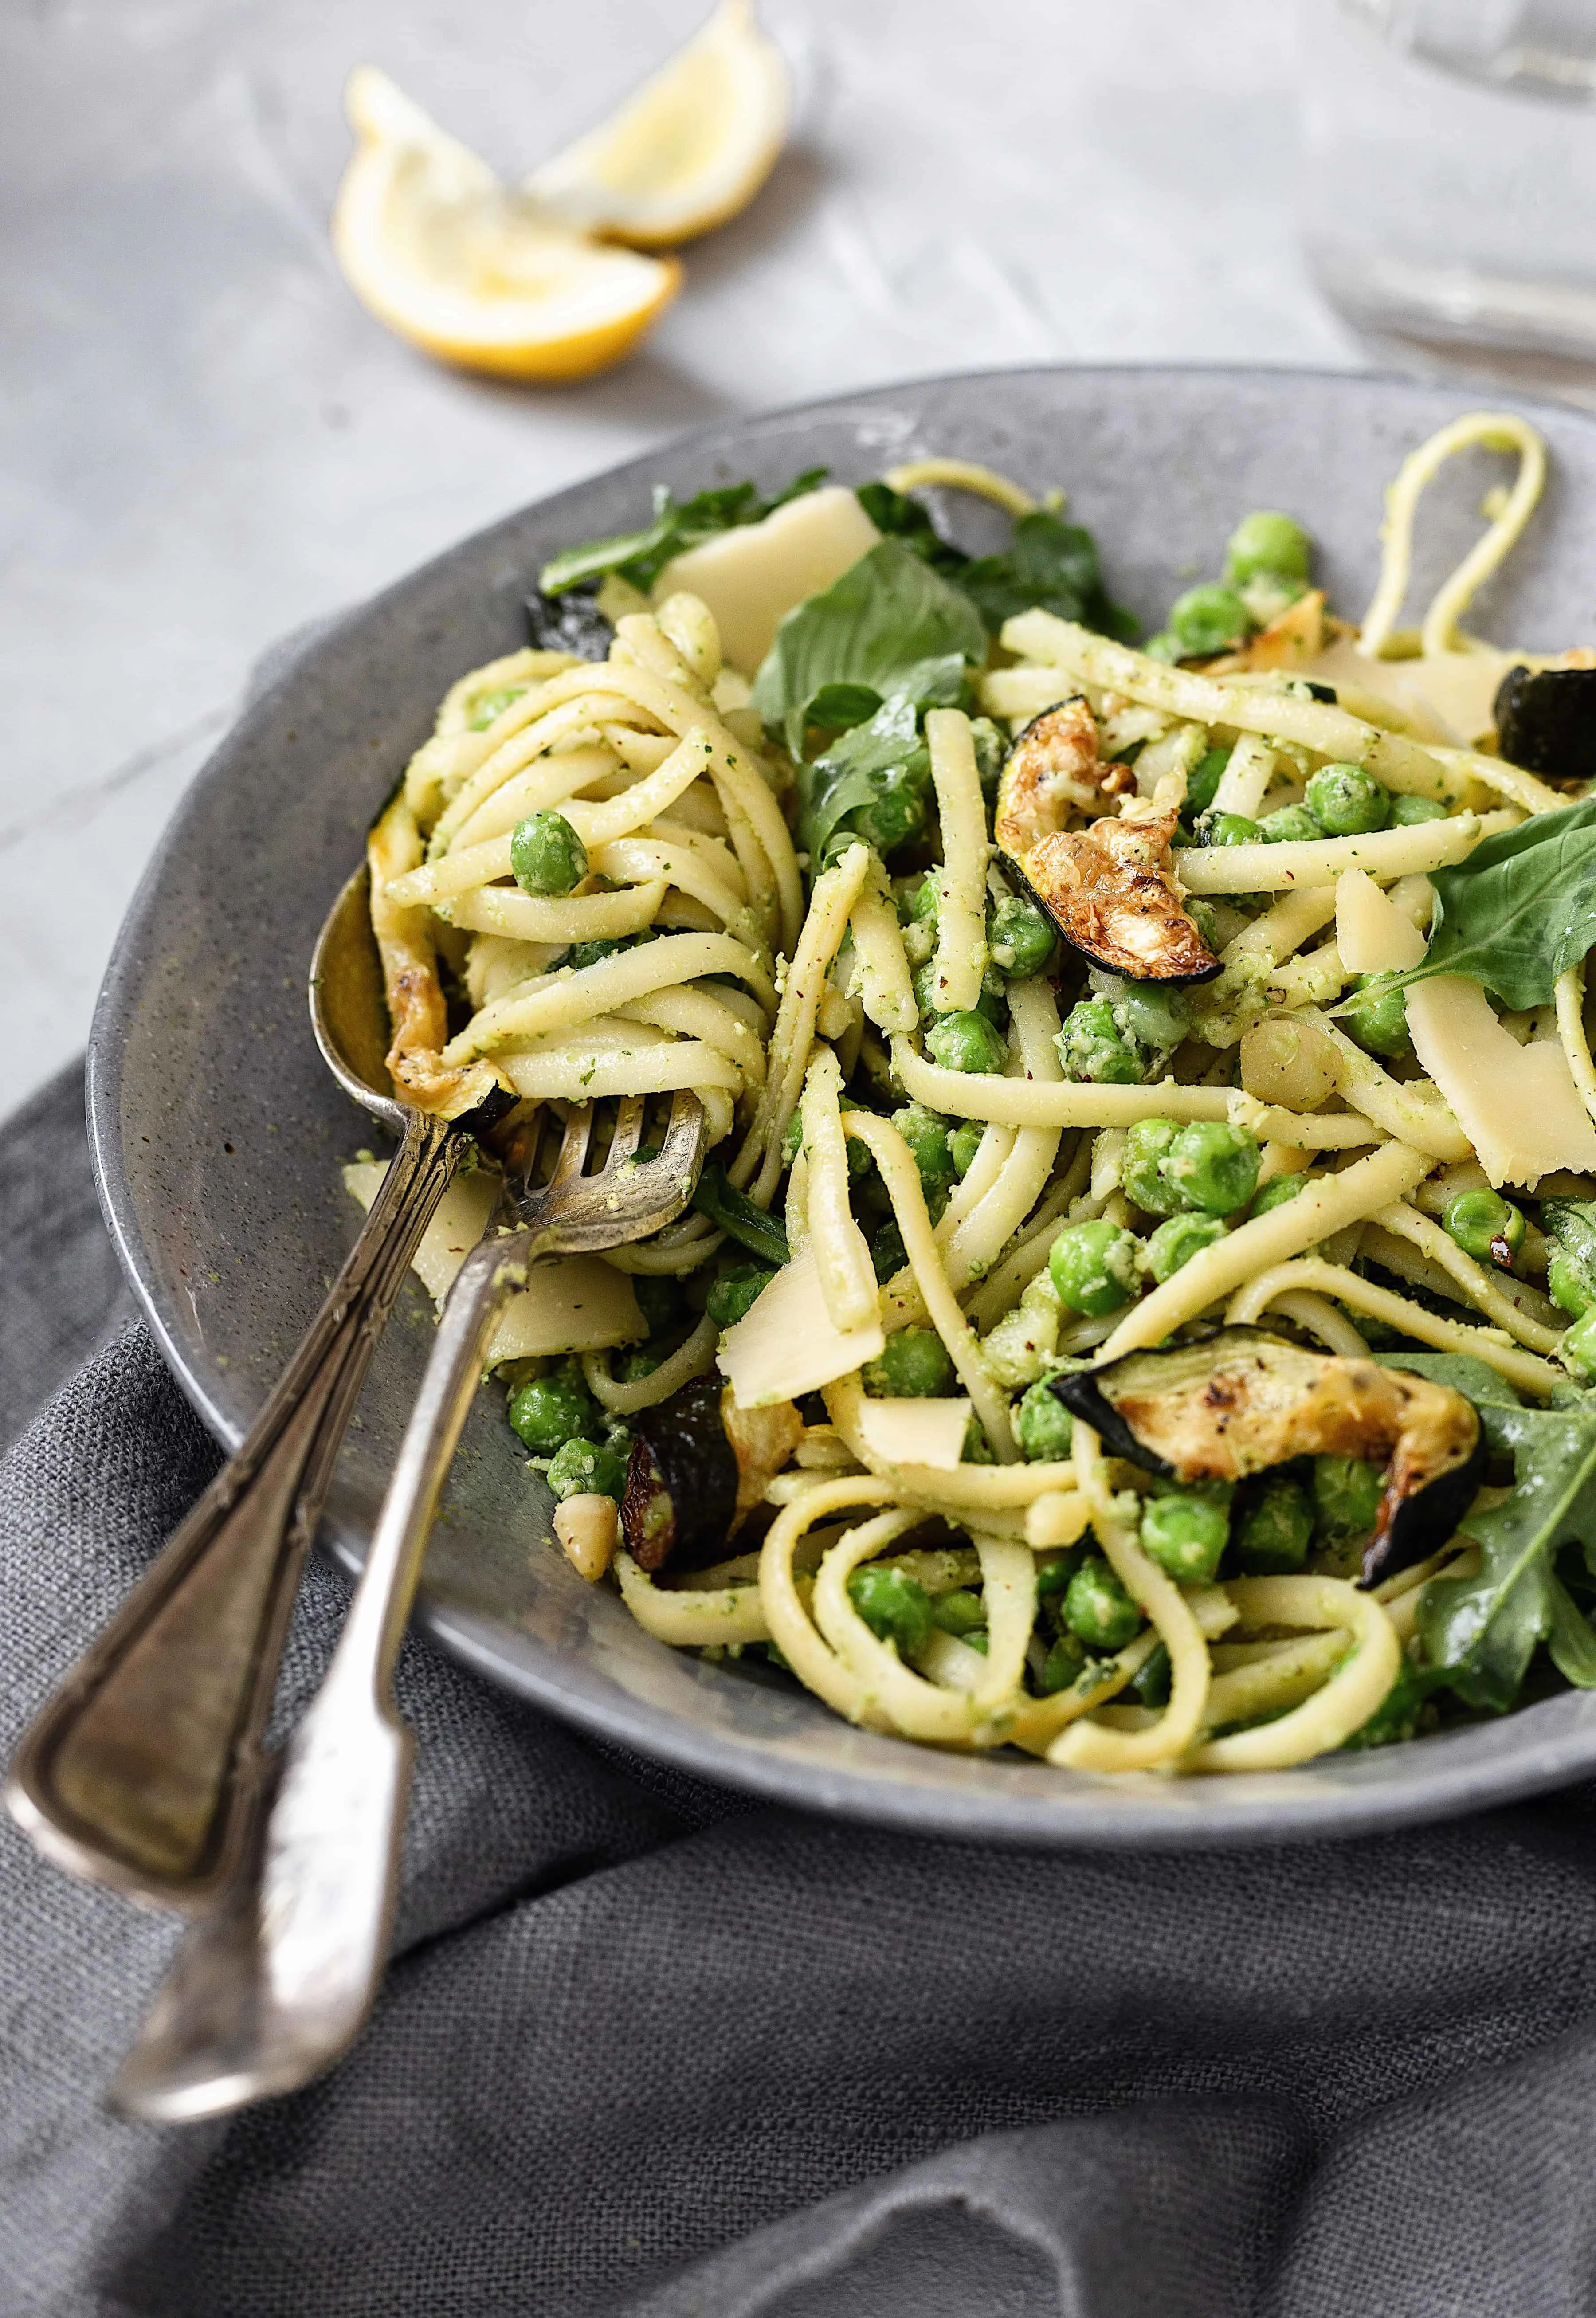 Creamy Brazil Nut Pesto Pasta with Roasted Courgette, Peas & Rocket -  Cupful of Kale